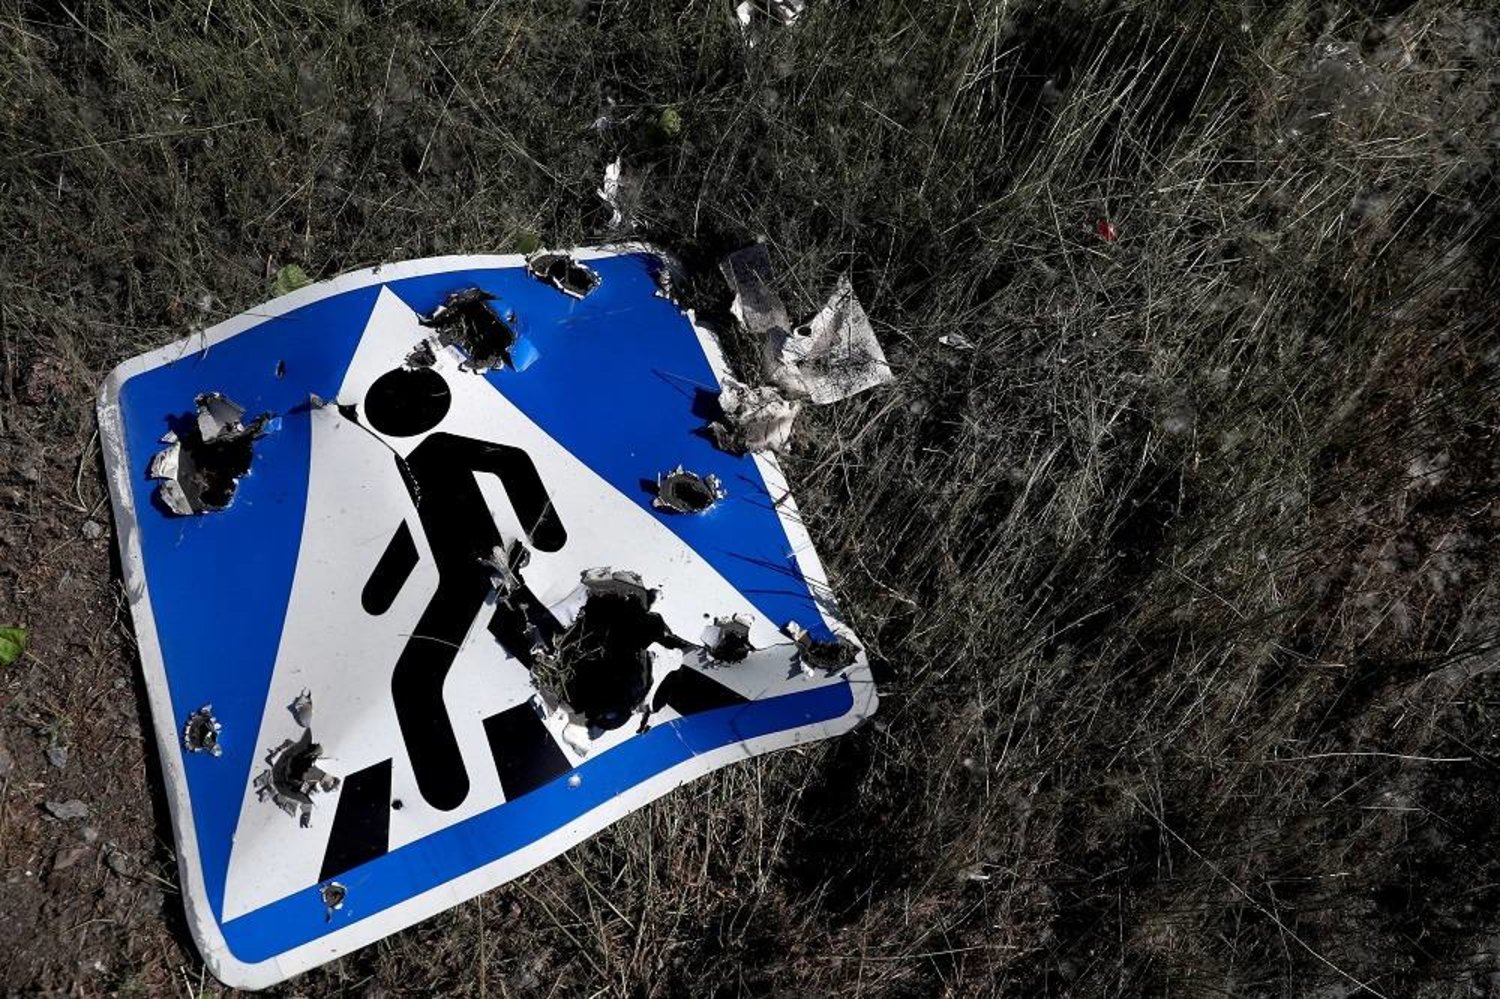 A road sign damaged by cluster munition is seen following a military strike, amid Russia's attack on Ukraine, on the outskirts of Kharkiv, Ukraine June 10, 2022. (Reuters)